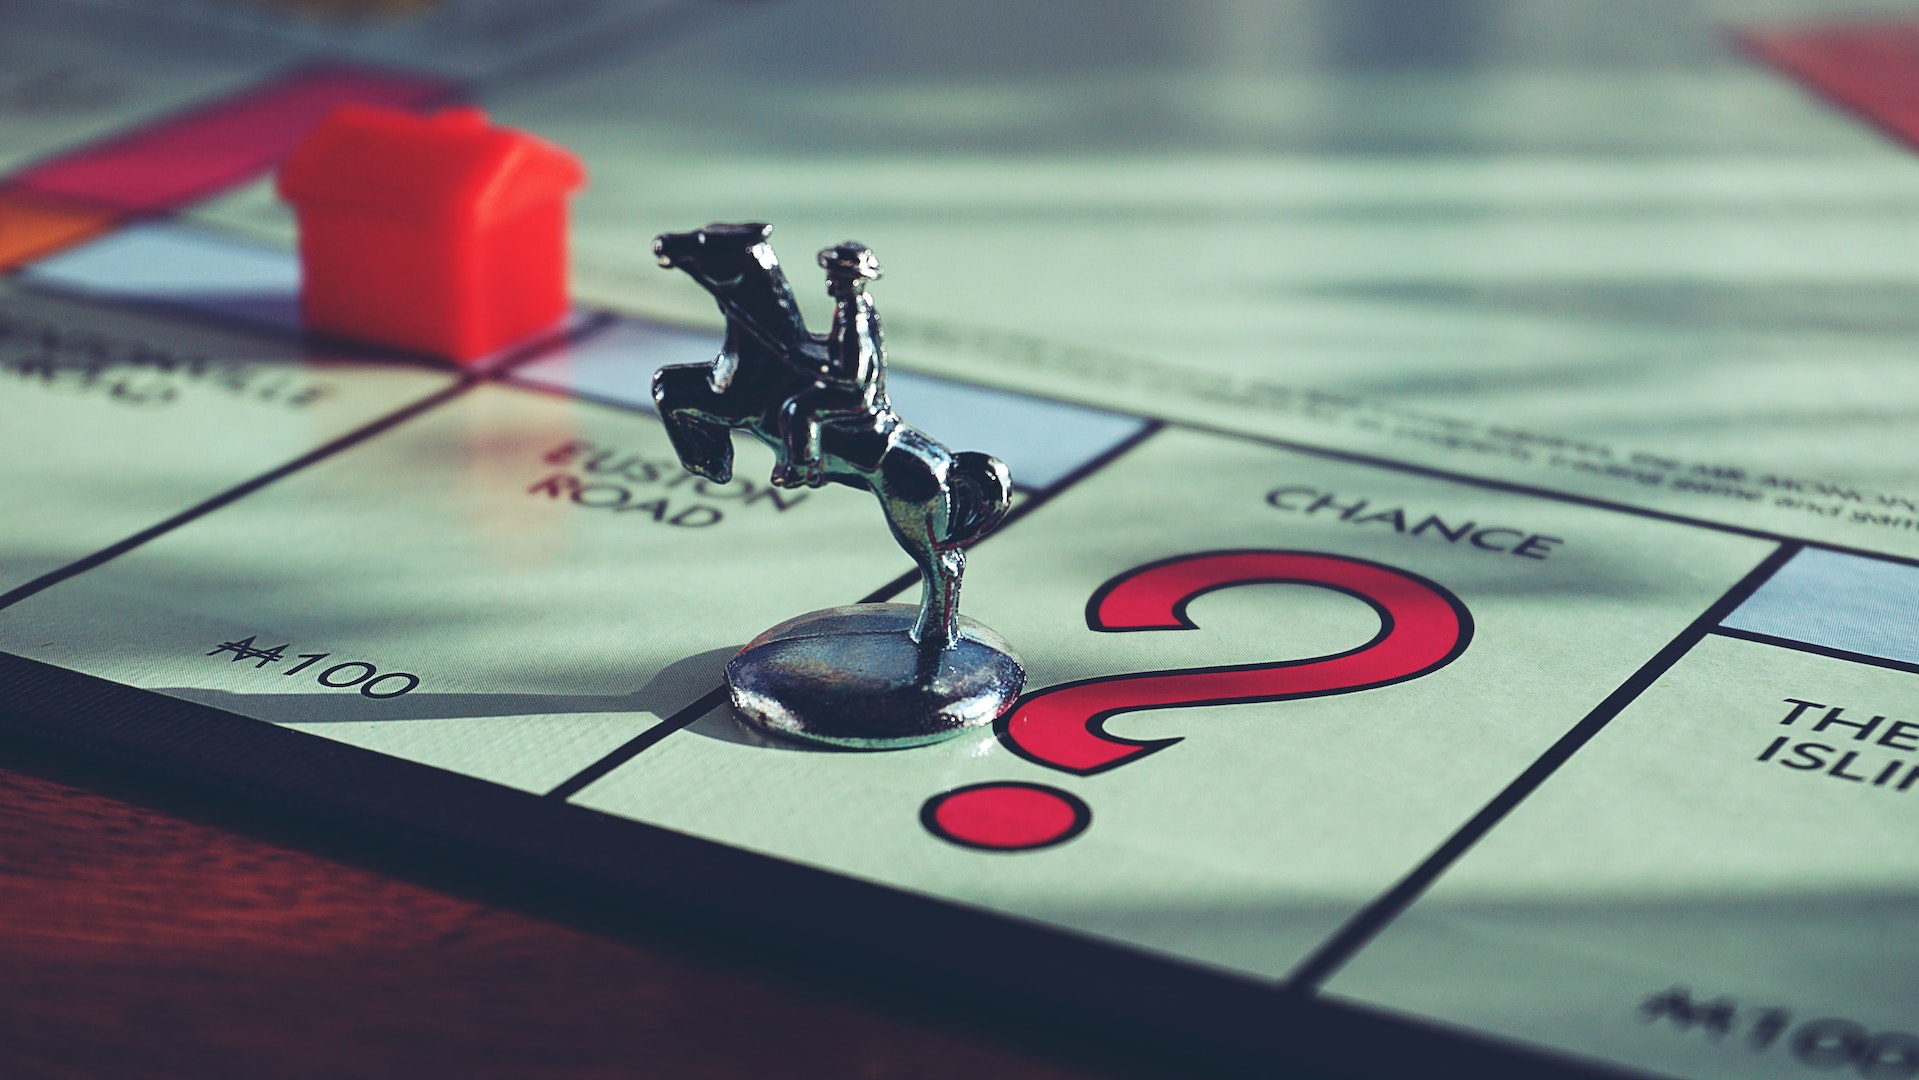 a monopoly horse and rider piece on the "chance" square of the board